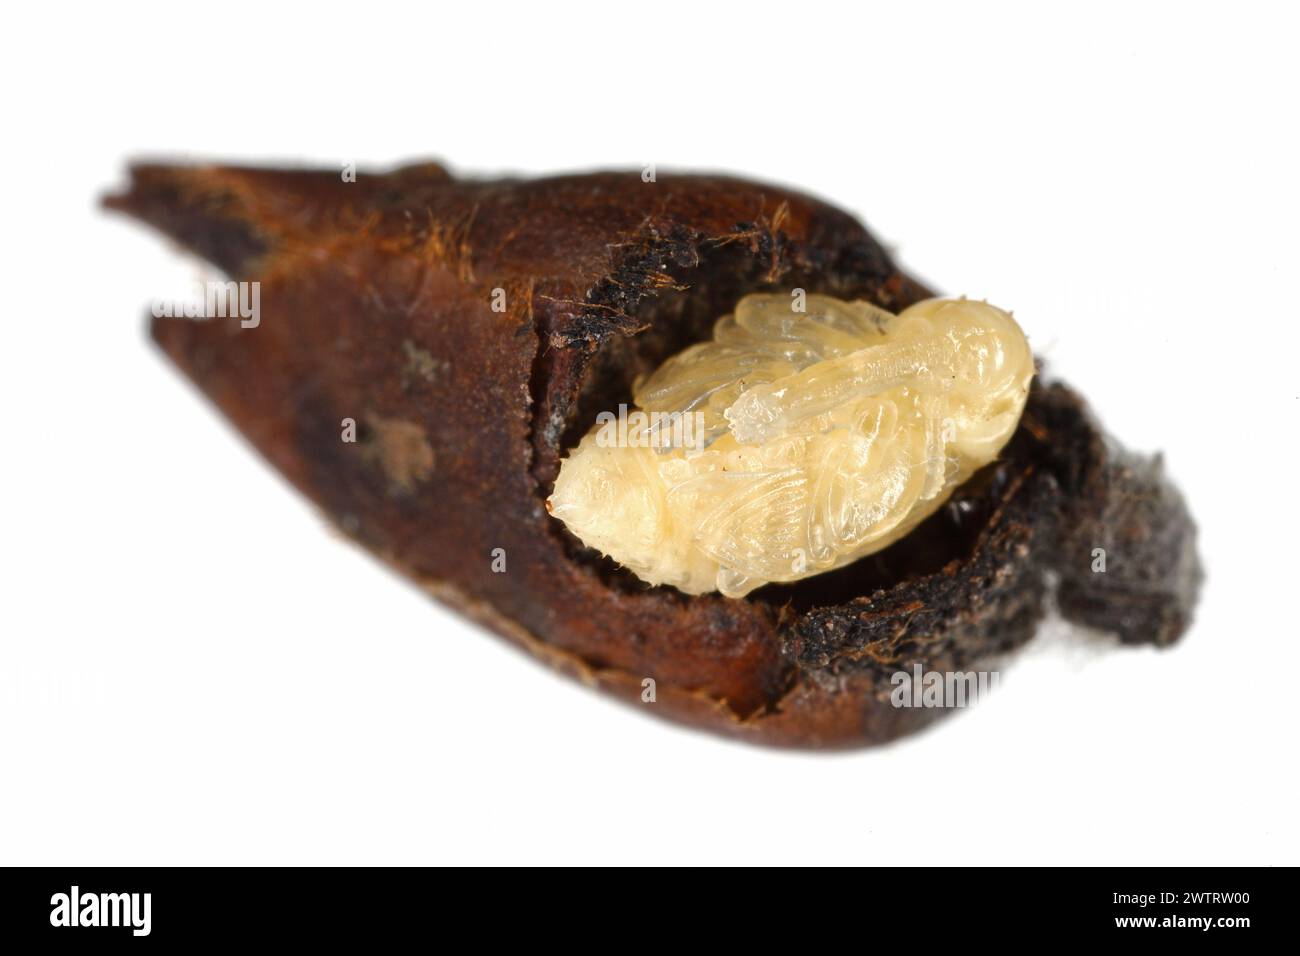 Pear weevil or pear blossom weevil (Anthonomus piri). A pest of pear trees that destroys buds. Pupa removed from the flower bud of pear tree. Stock Photo